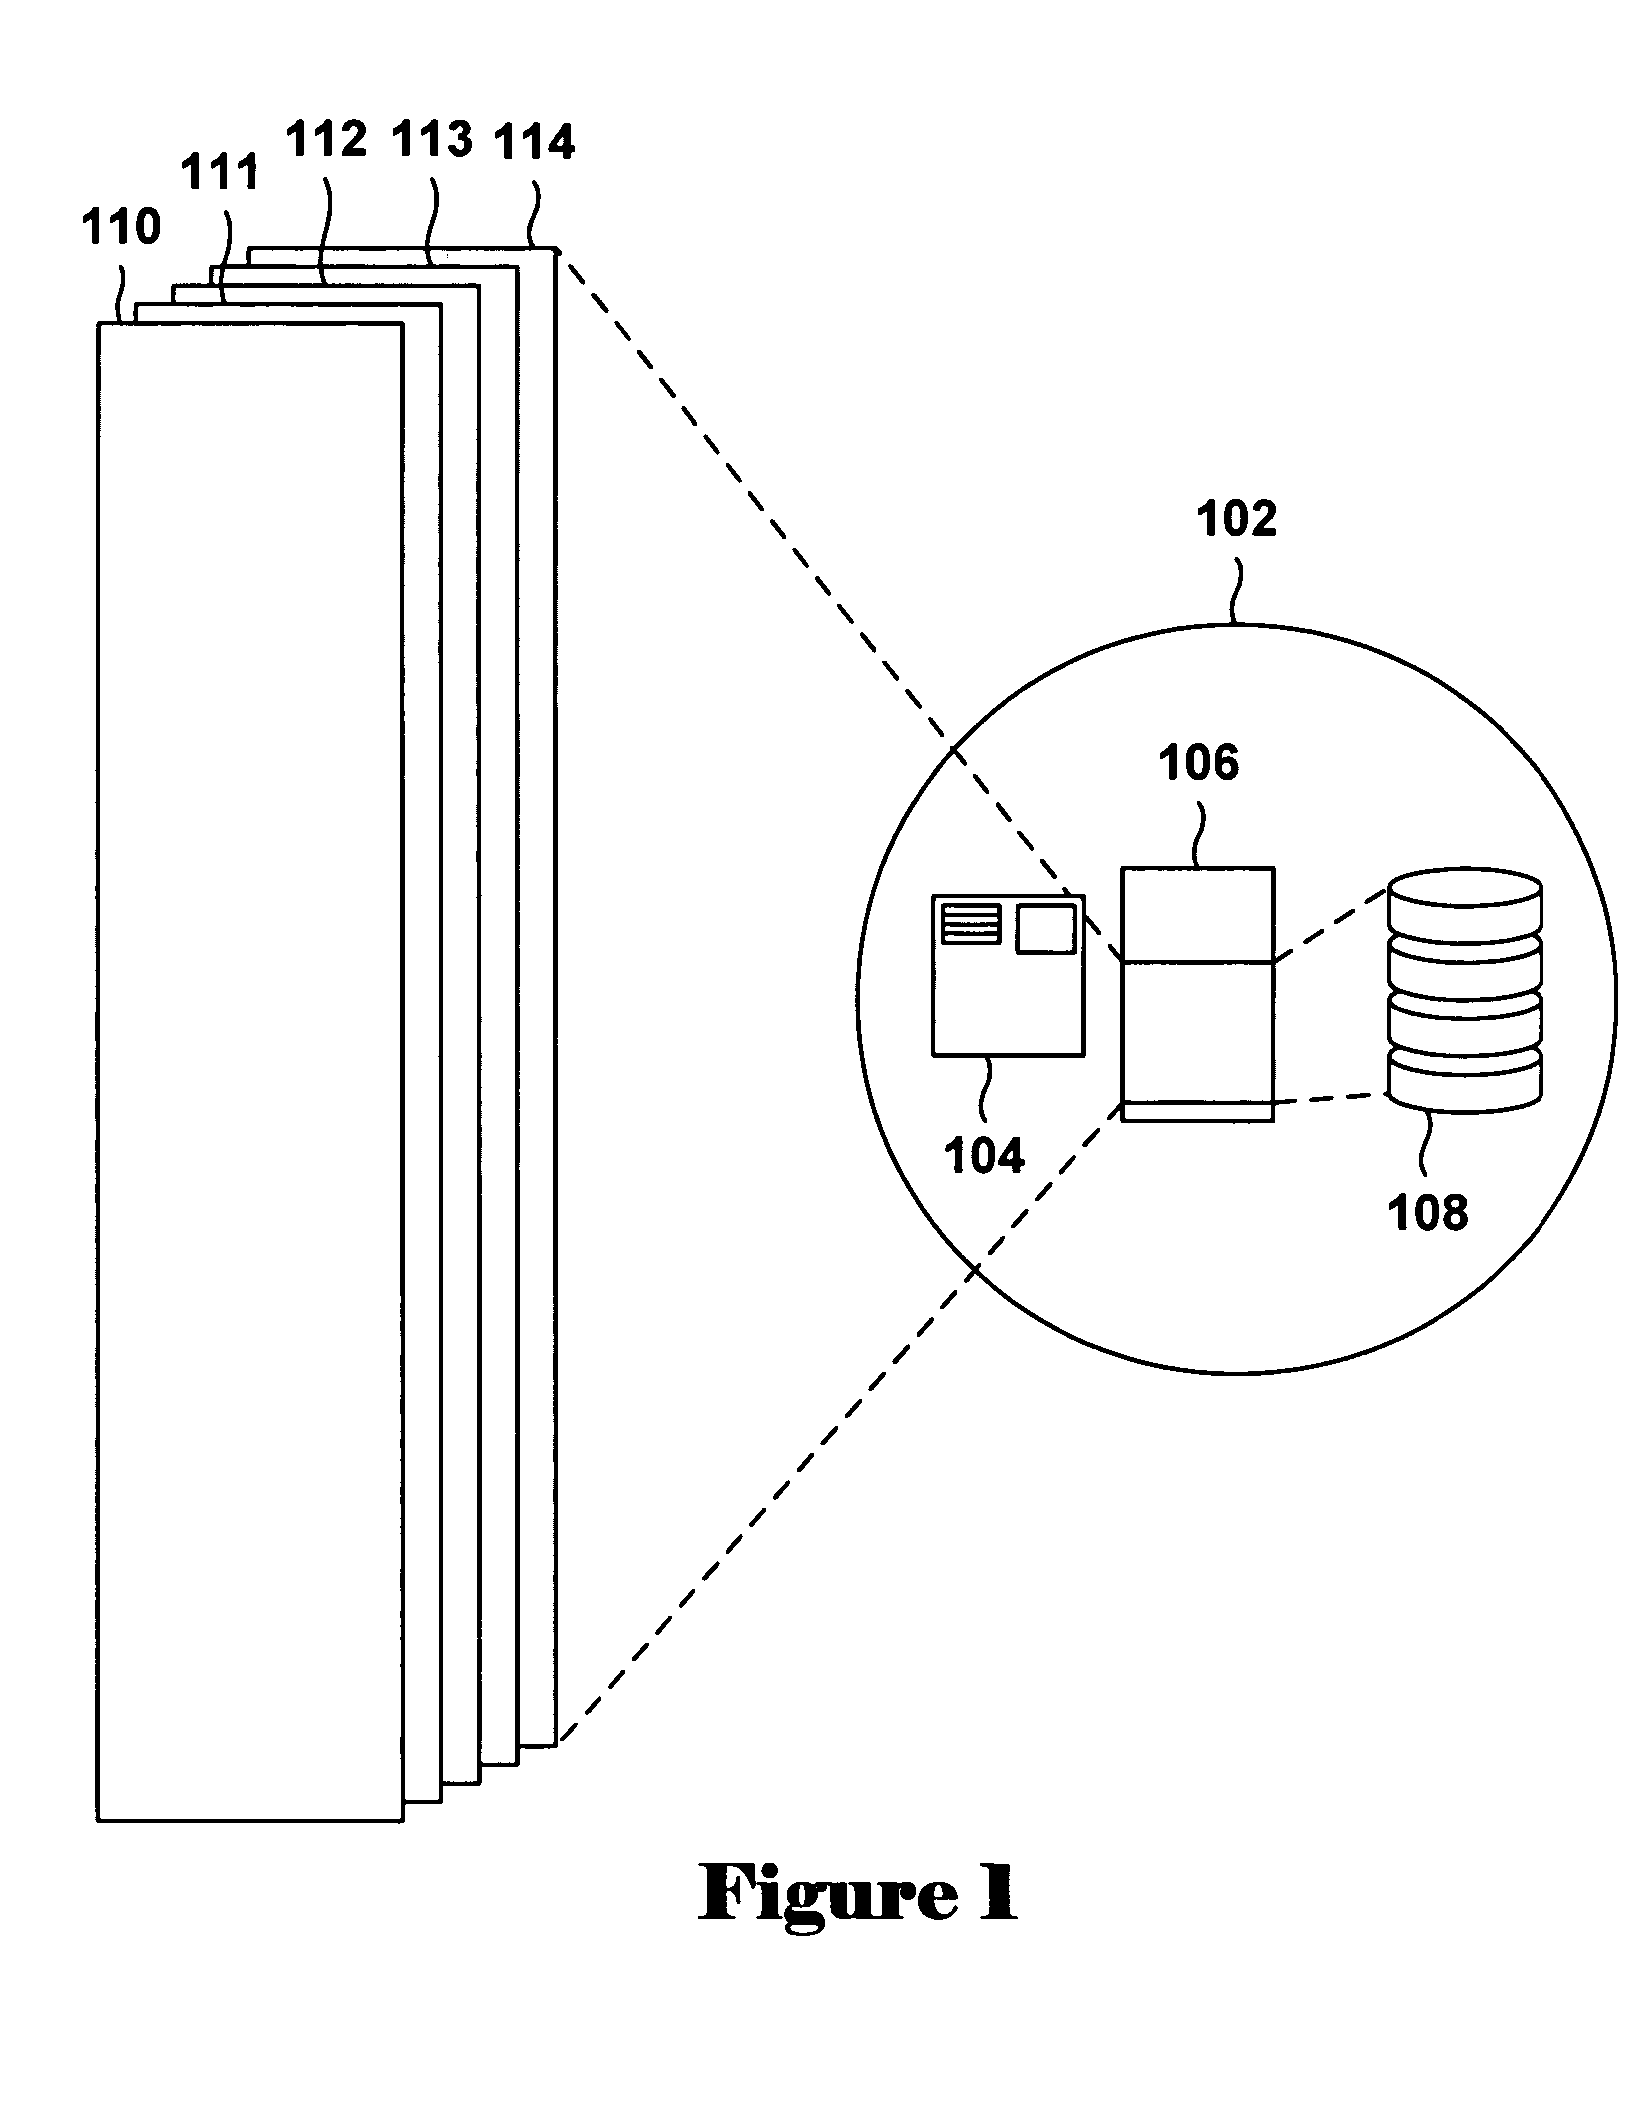 Method for patching virtually aliased pages by a virtual-machine monitor